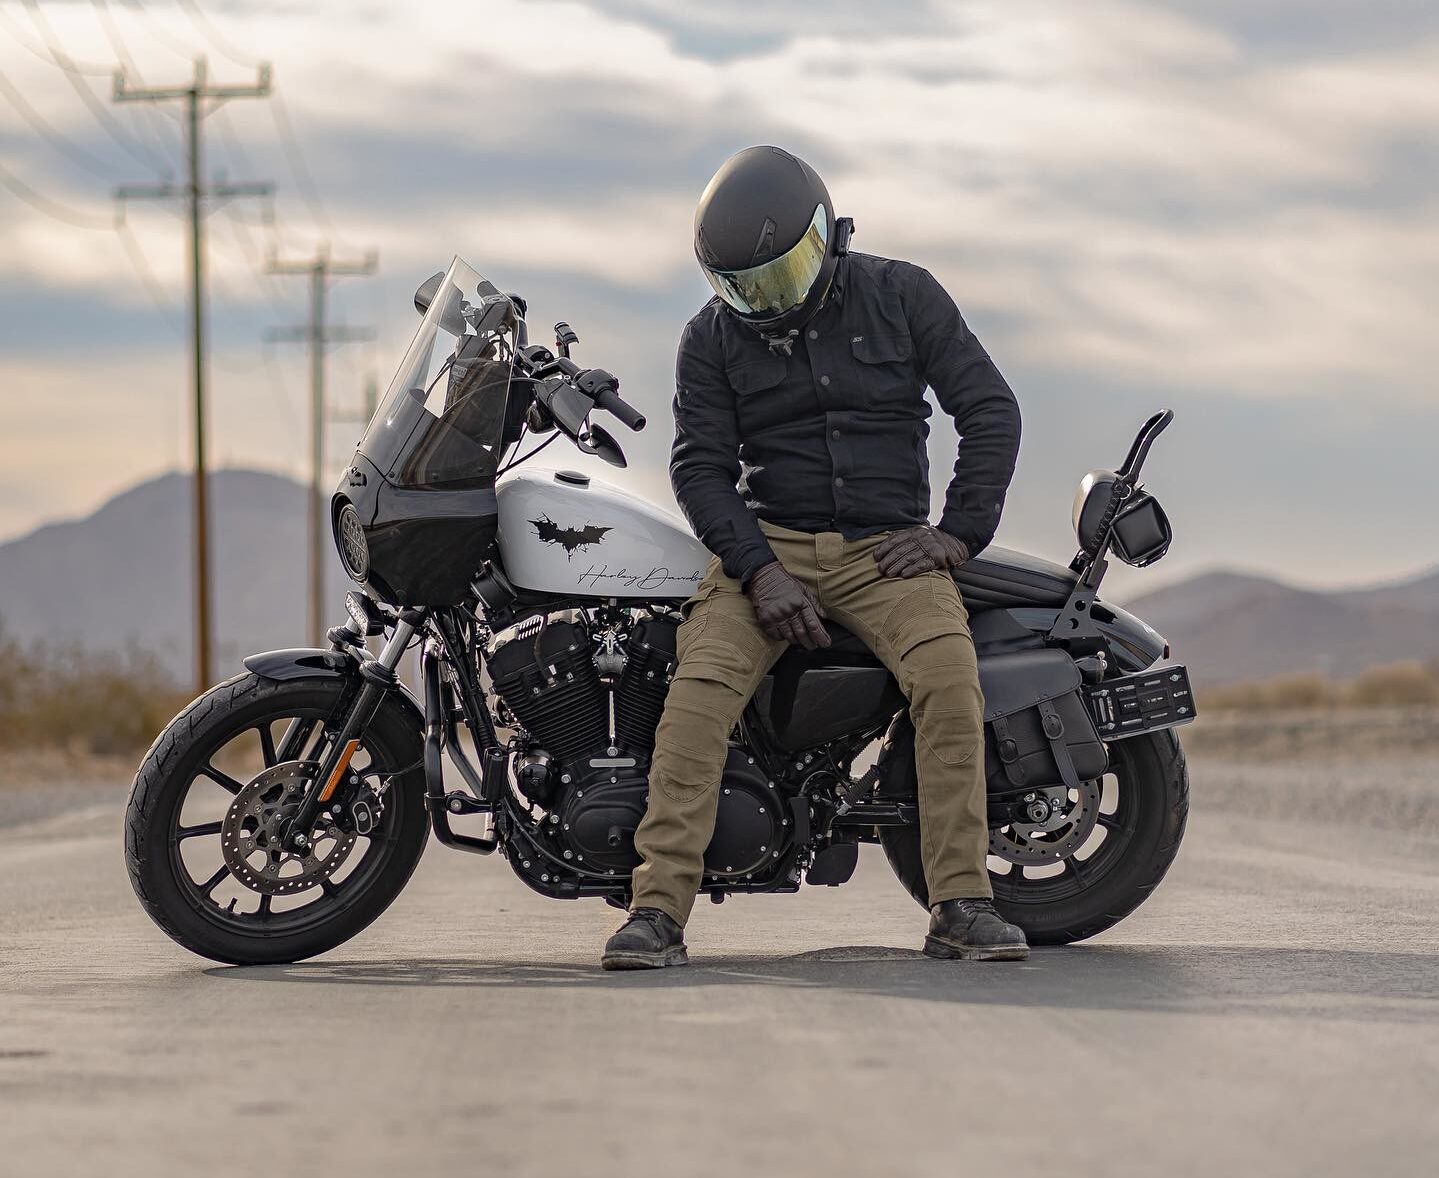 Ranking the 5 Best Purchases for Your Next Motorcycle Journey